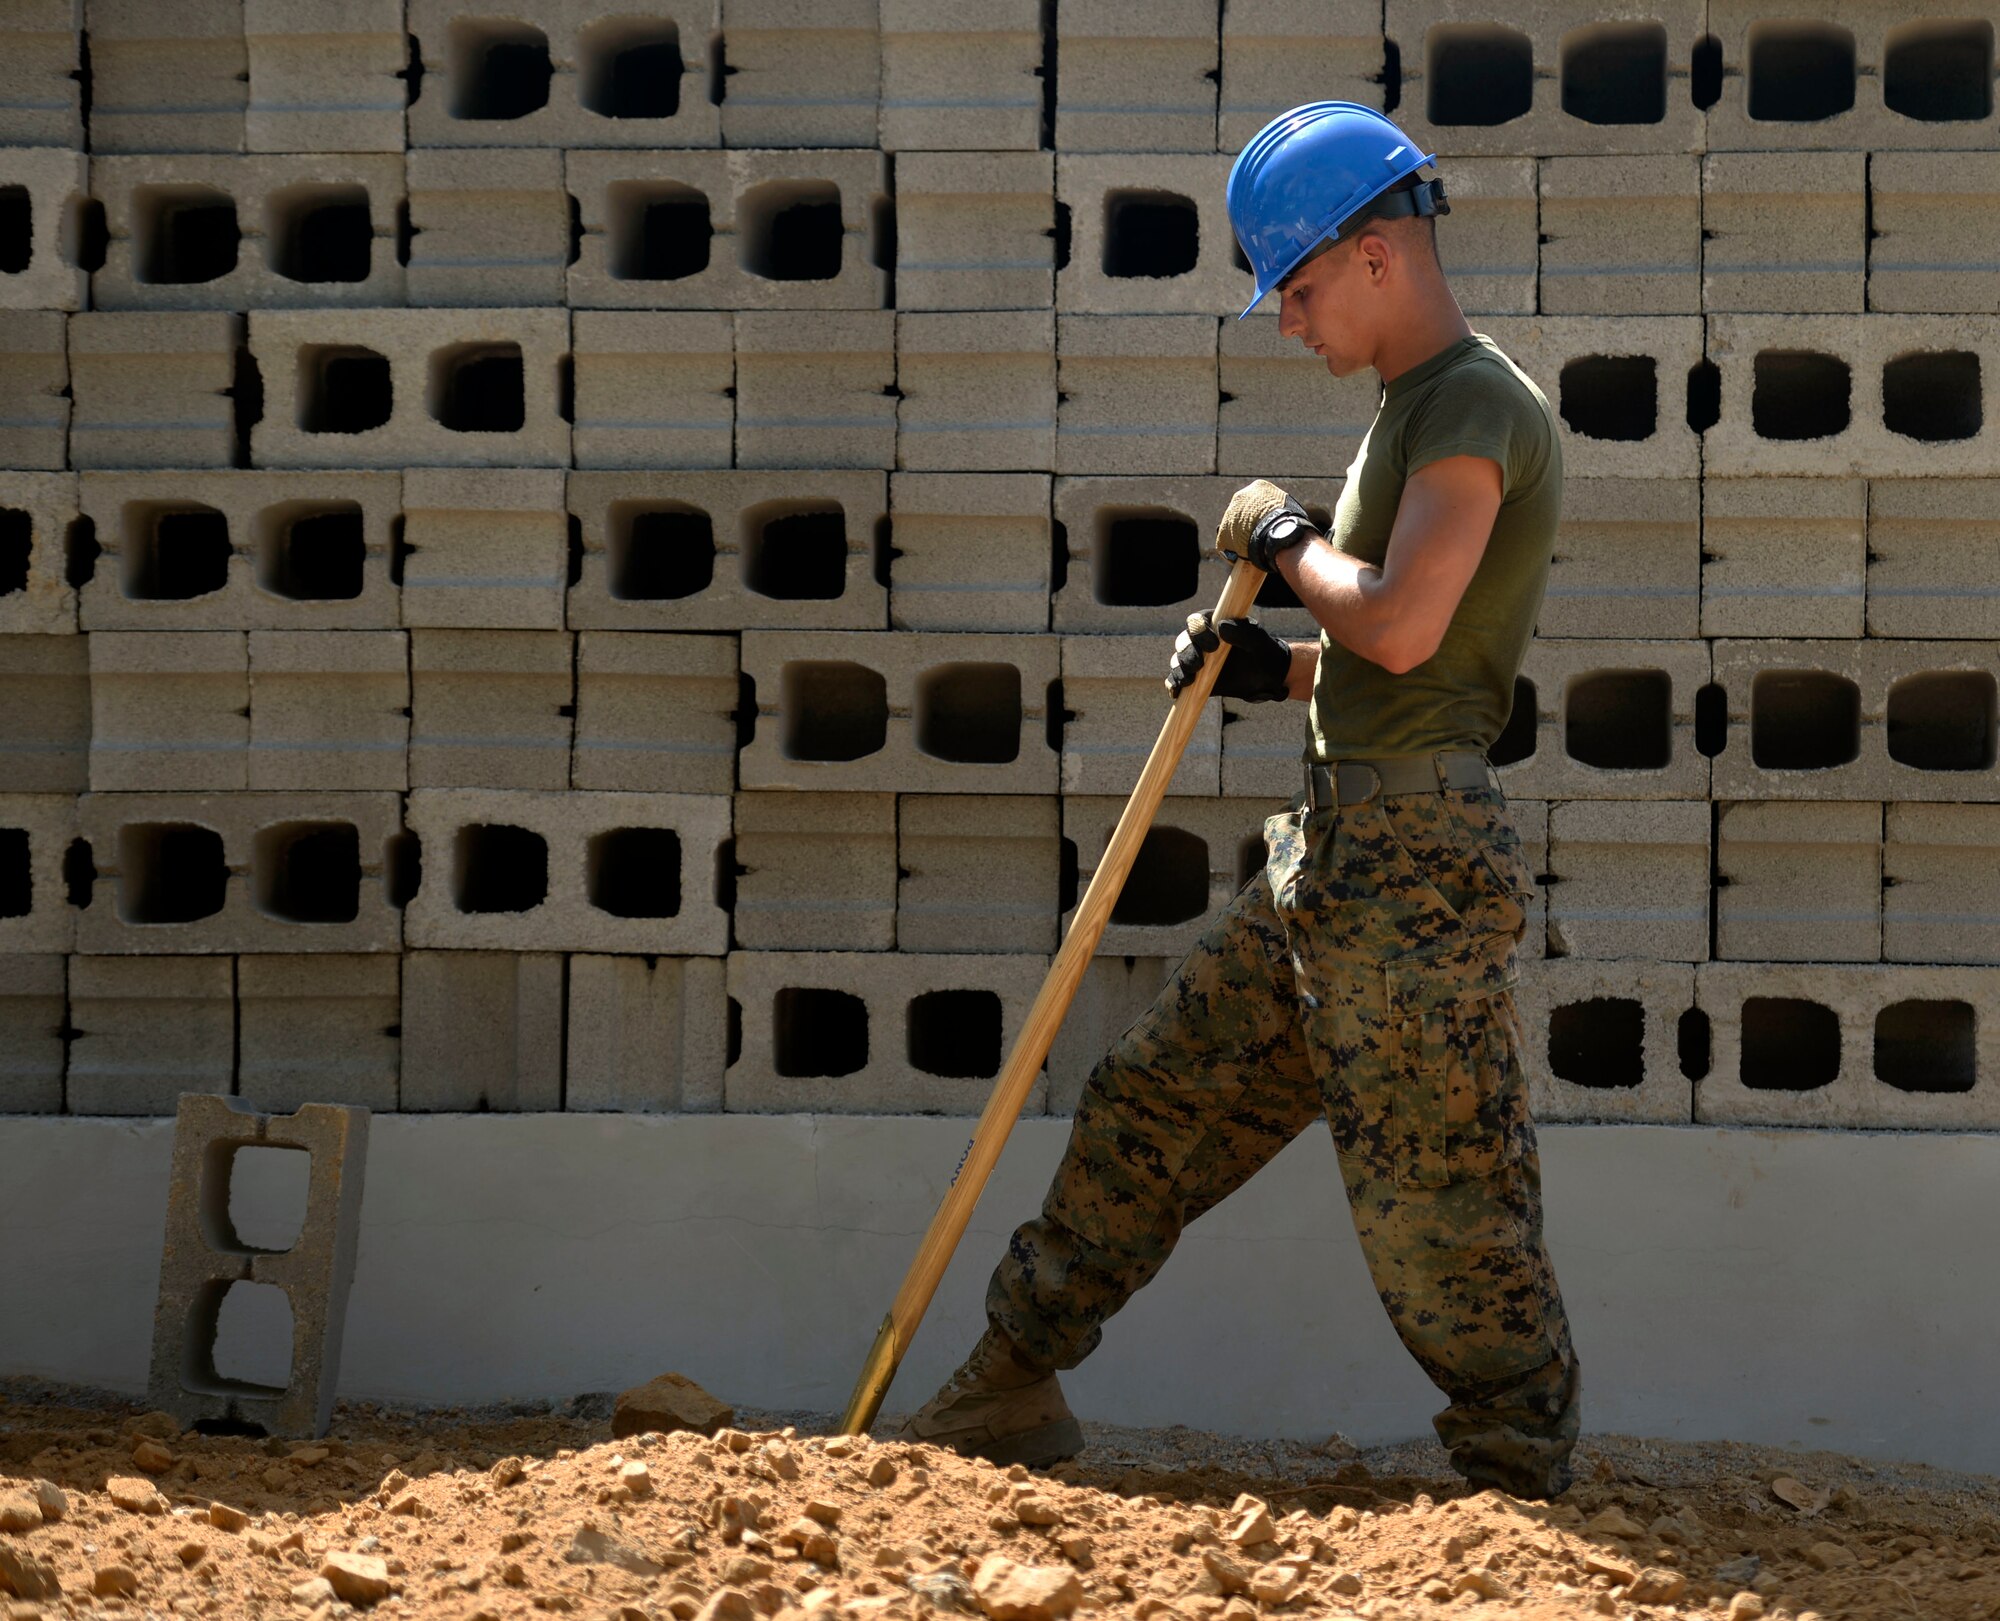 U.S. Marine Corporal Benjamin Moonen, a combat engineer with a 271st Marine Wing Support Squadron, 2nd Marine Air Wing, out of Marine Corps Air Station Cherry Point, N.C., and Sturgeon Lake, Minn. native, helps dig a trench for electrical wire during construction at the Gabriela Mistral primary school in Ocotoes Alto, Honduras, June 1, 2015. The school project is one part of the New Horizons Honduras 2015, an annual humanitarian and training exercise put on by U.S. Southern Command. New Horizons was launched in the 1980s and is an annual joint humanitarian assistance exercise that U.S. Southern Command conducts with a partner nation in Central America, South America or the Caribbean. The exercise improves joint training readiness of U.S. and partner nation civil engineers, medical professionals and support personnel through humanitarian assistance activities. (U.S. Air Force photo by Capt. David J. Murphy/Released)